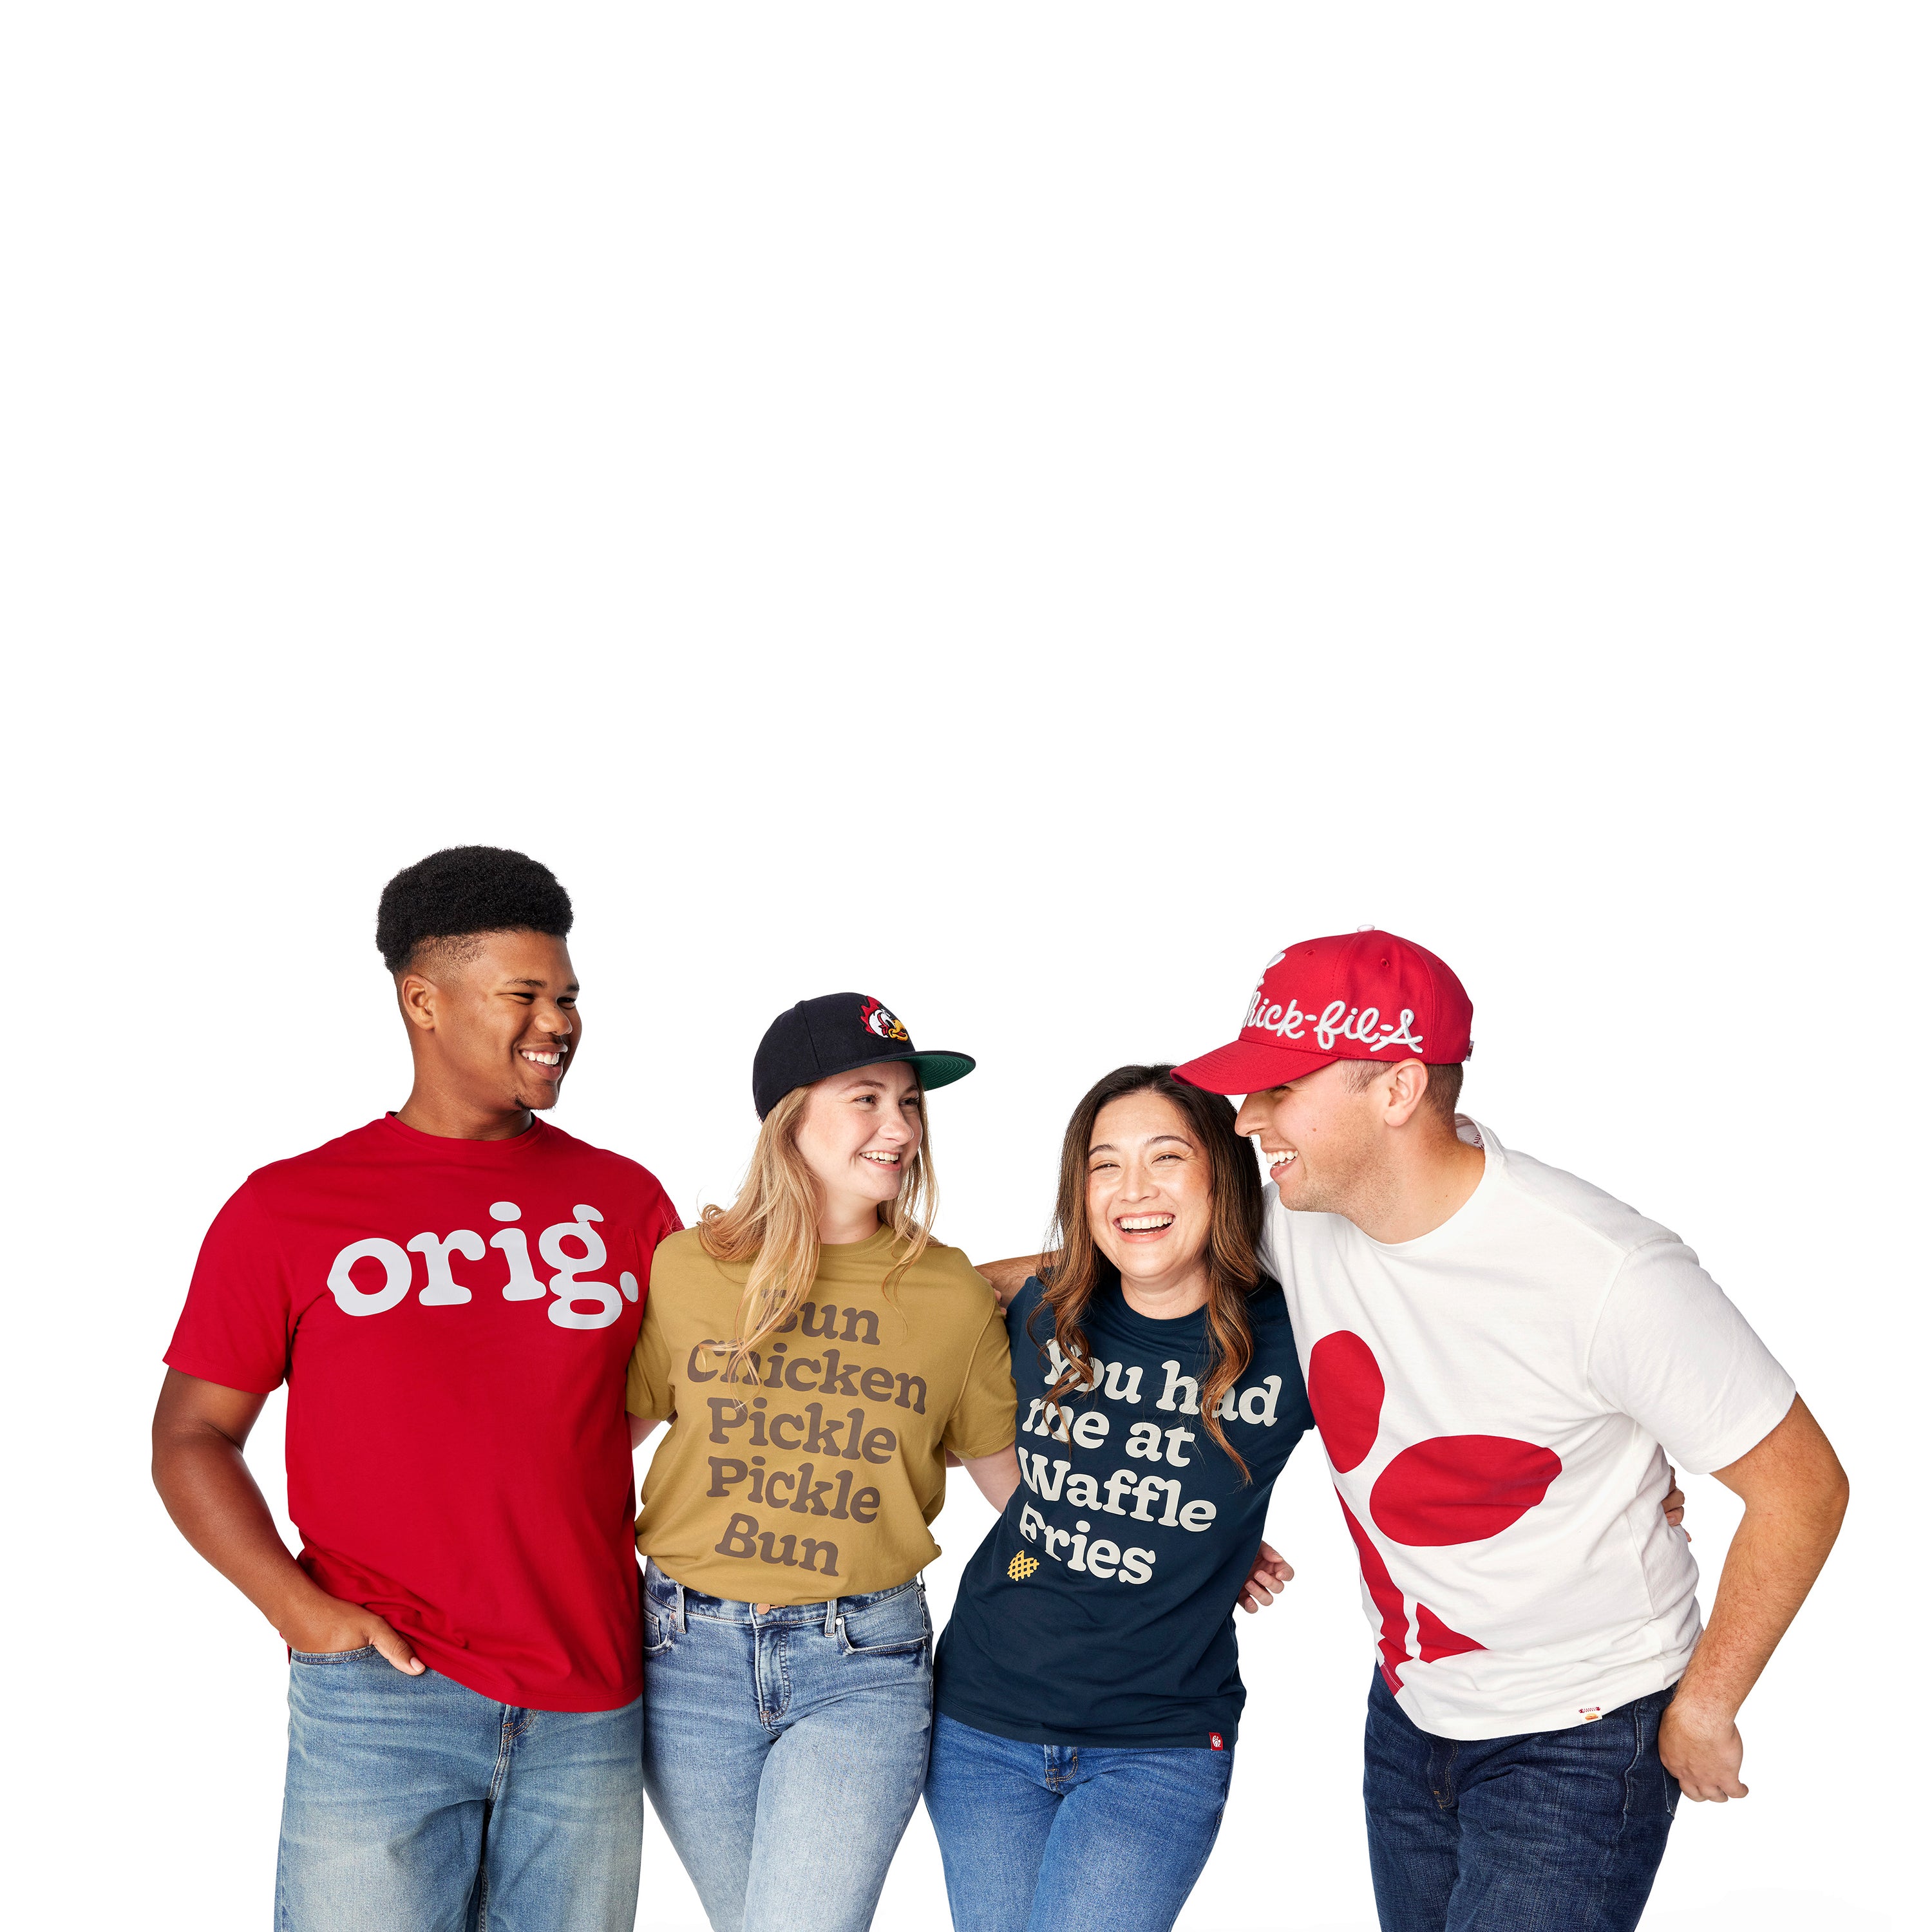 Man in Orig. Garment Dyed Pocket Tee, woman in Bun Chicken Pickle Pickle Bun Tee, woman in Waffle Fry Cotton Jersey Tee, and man in Chick-fil-A Logo Print Tee with arms around each other